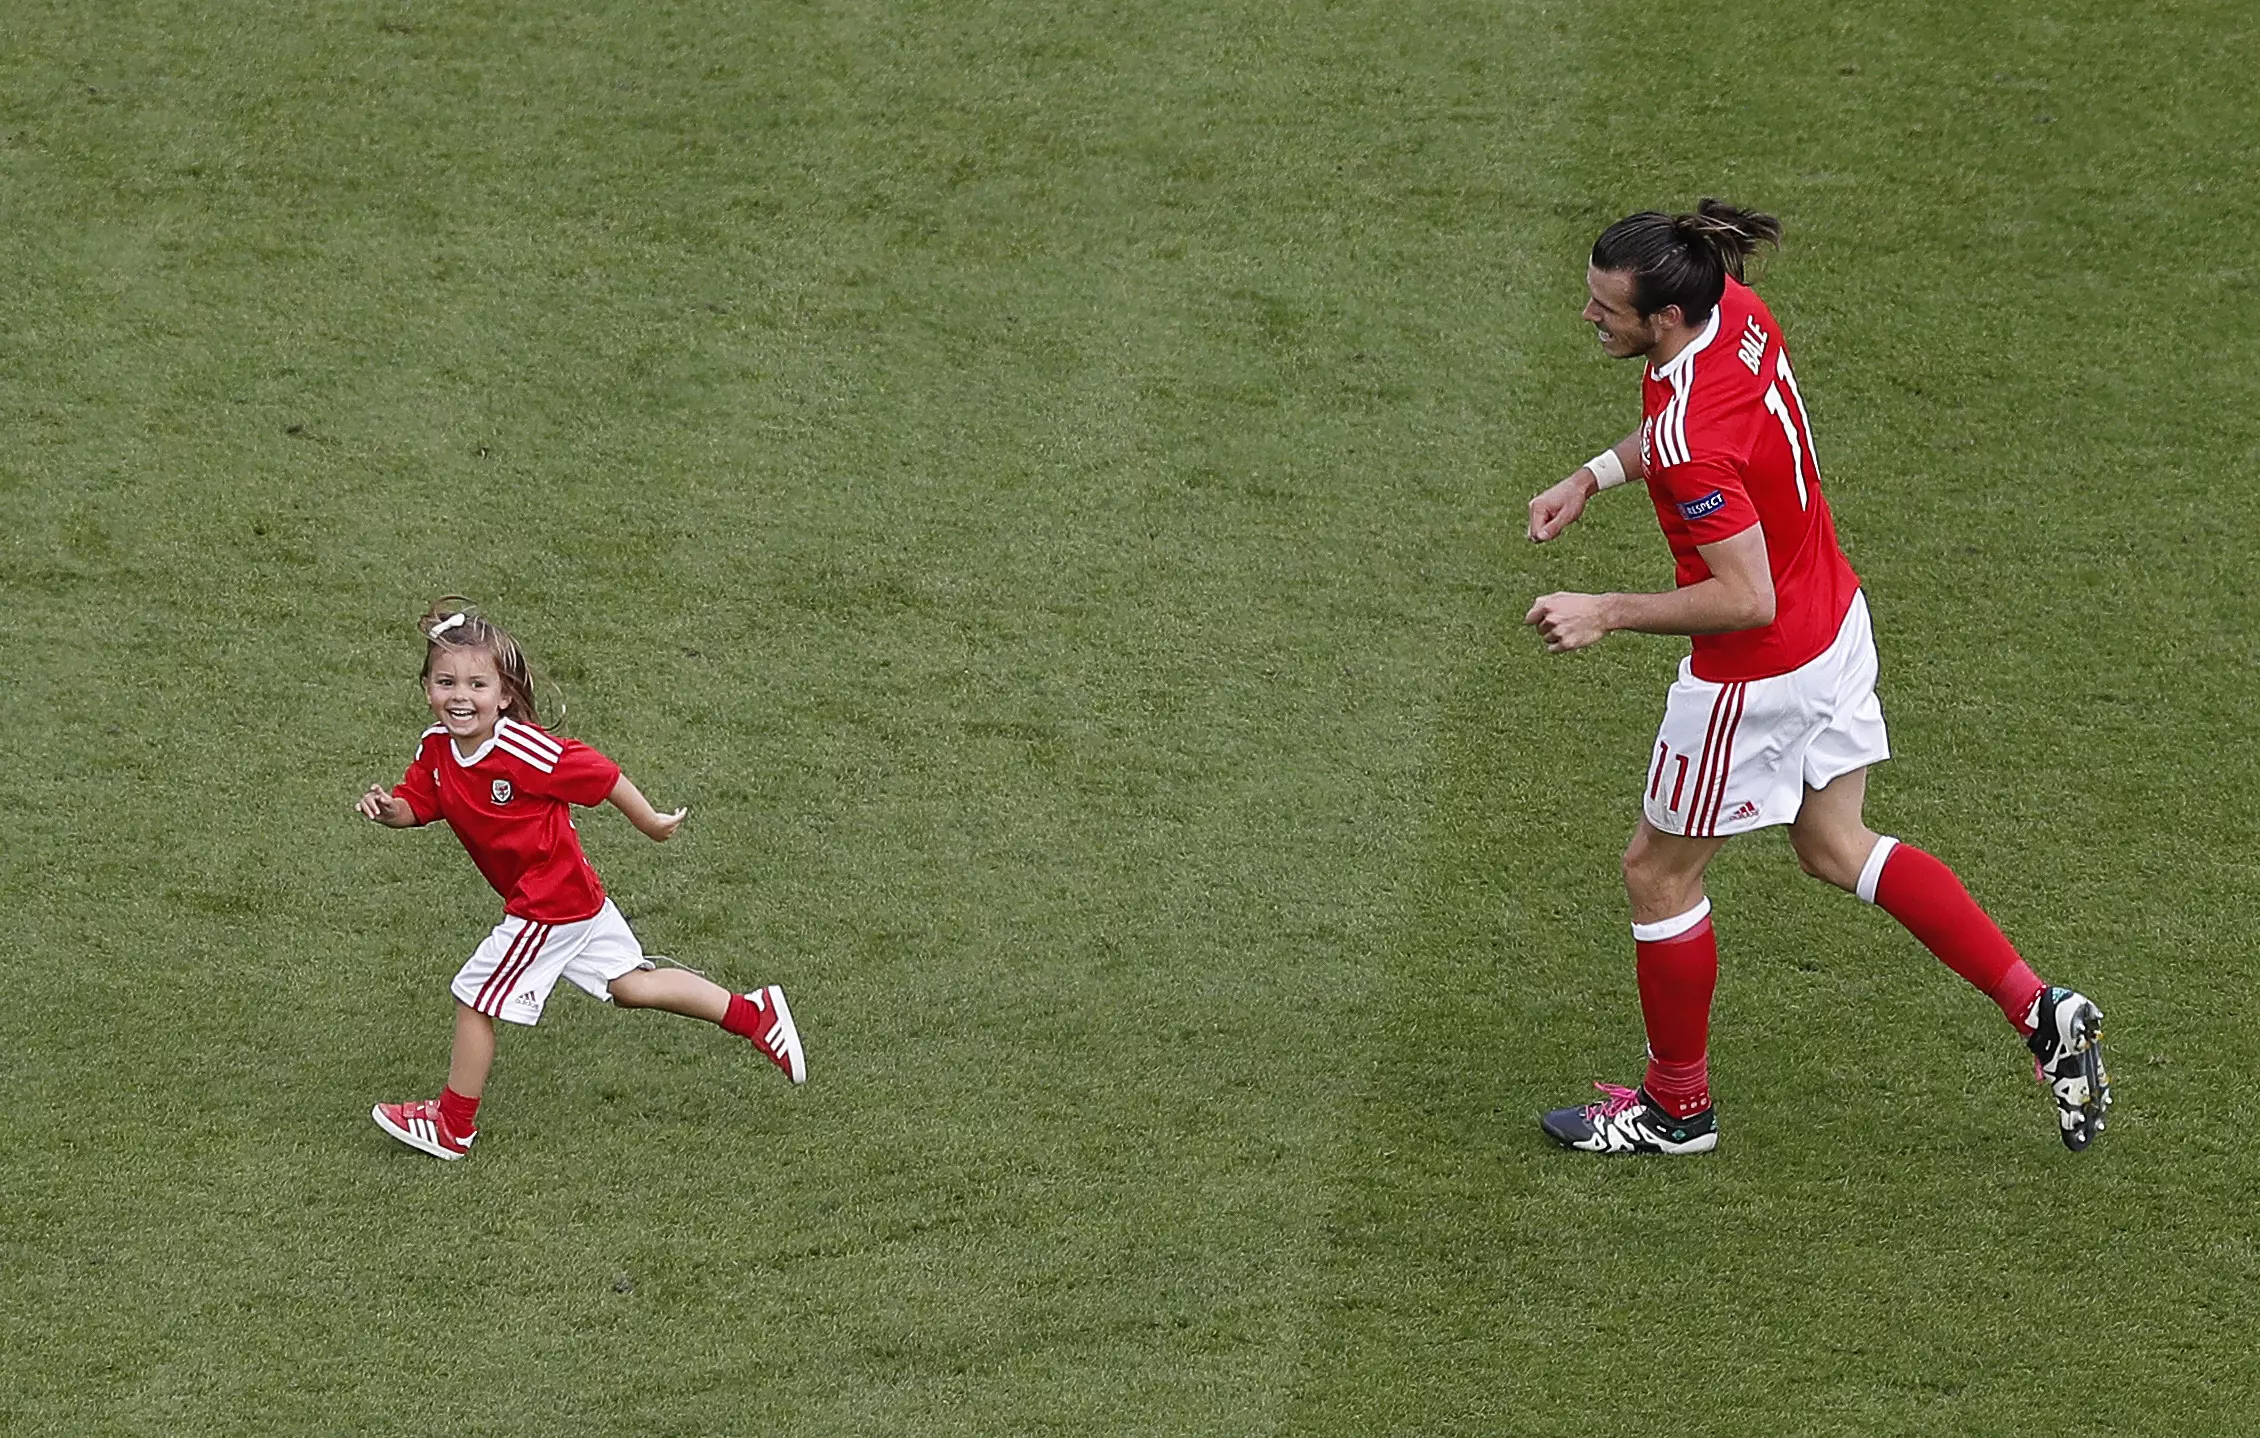 WATCH: Gareth Bale's Daughter Scores In Front Of Wales Fans After Match